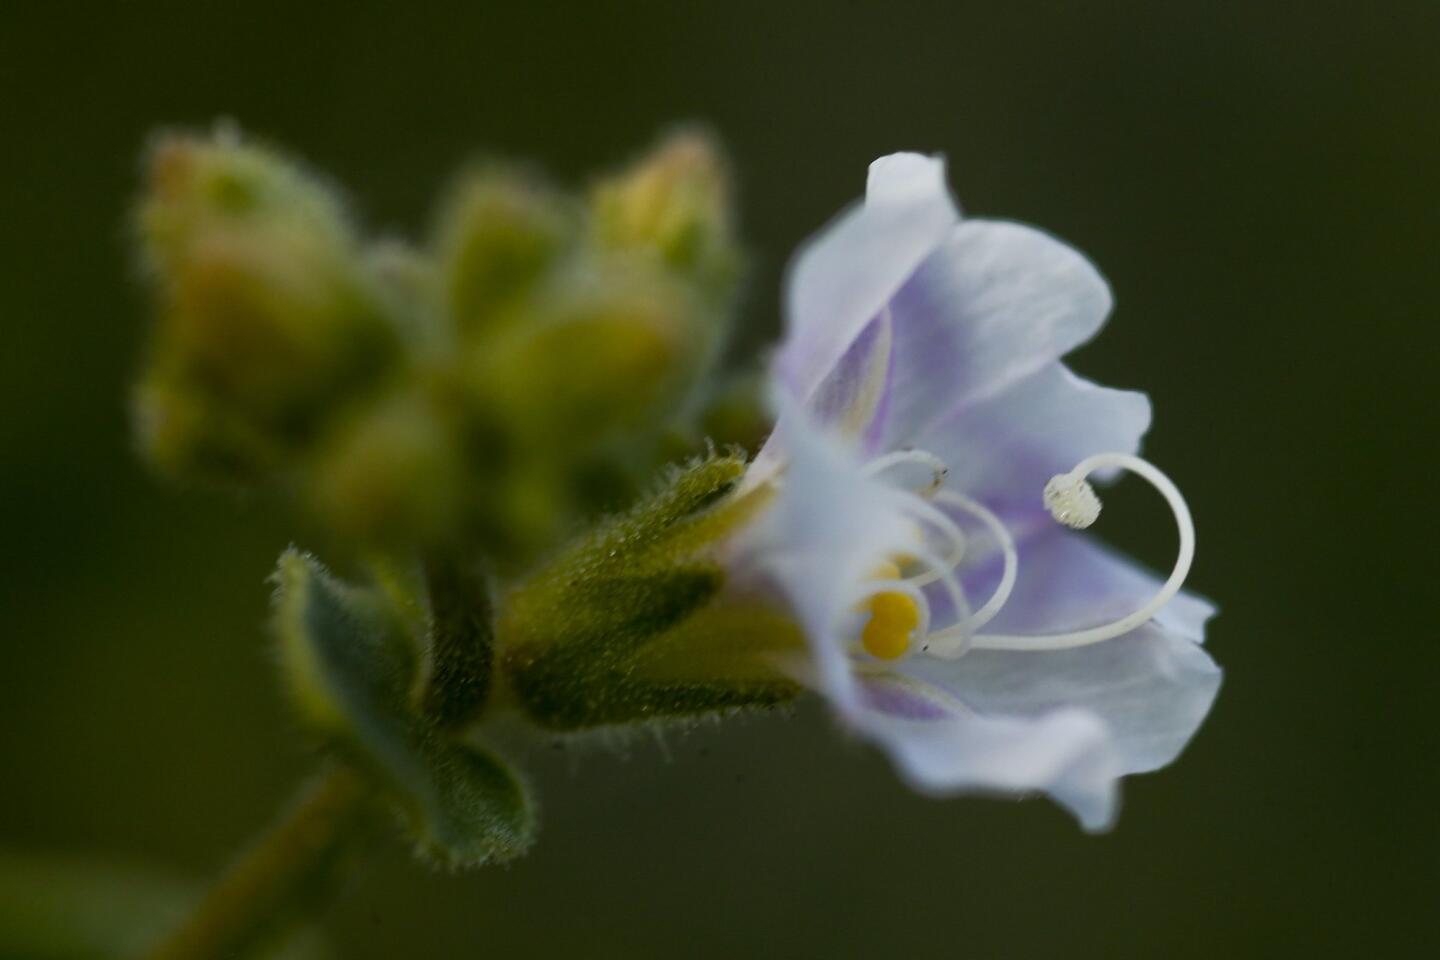 The delicate flower of the wishbone bush (Mirabilis laevis var.retrorsa) opens only in the late afternoon.